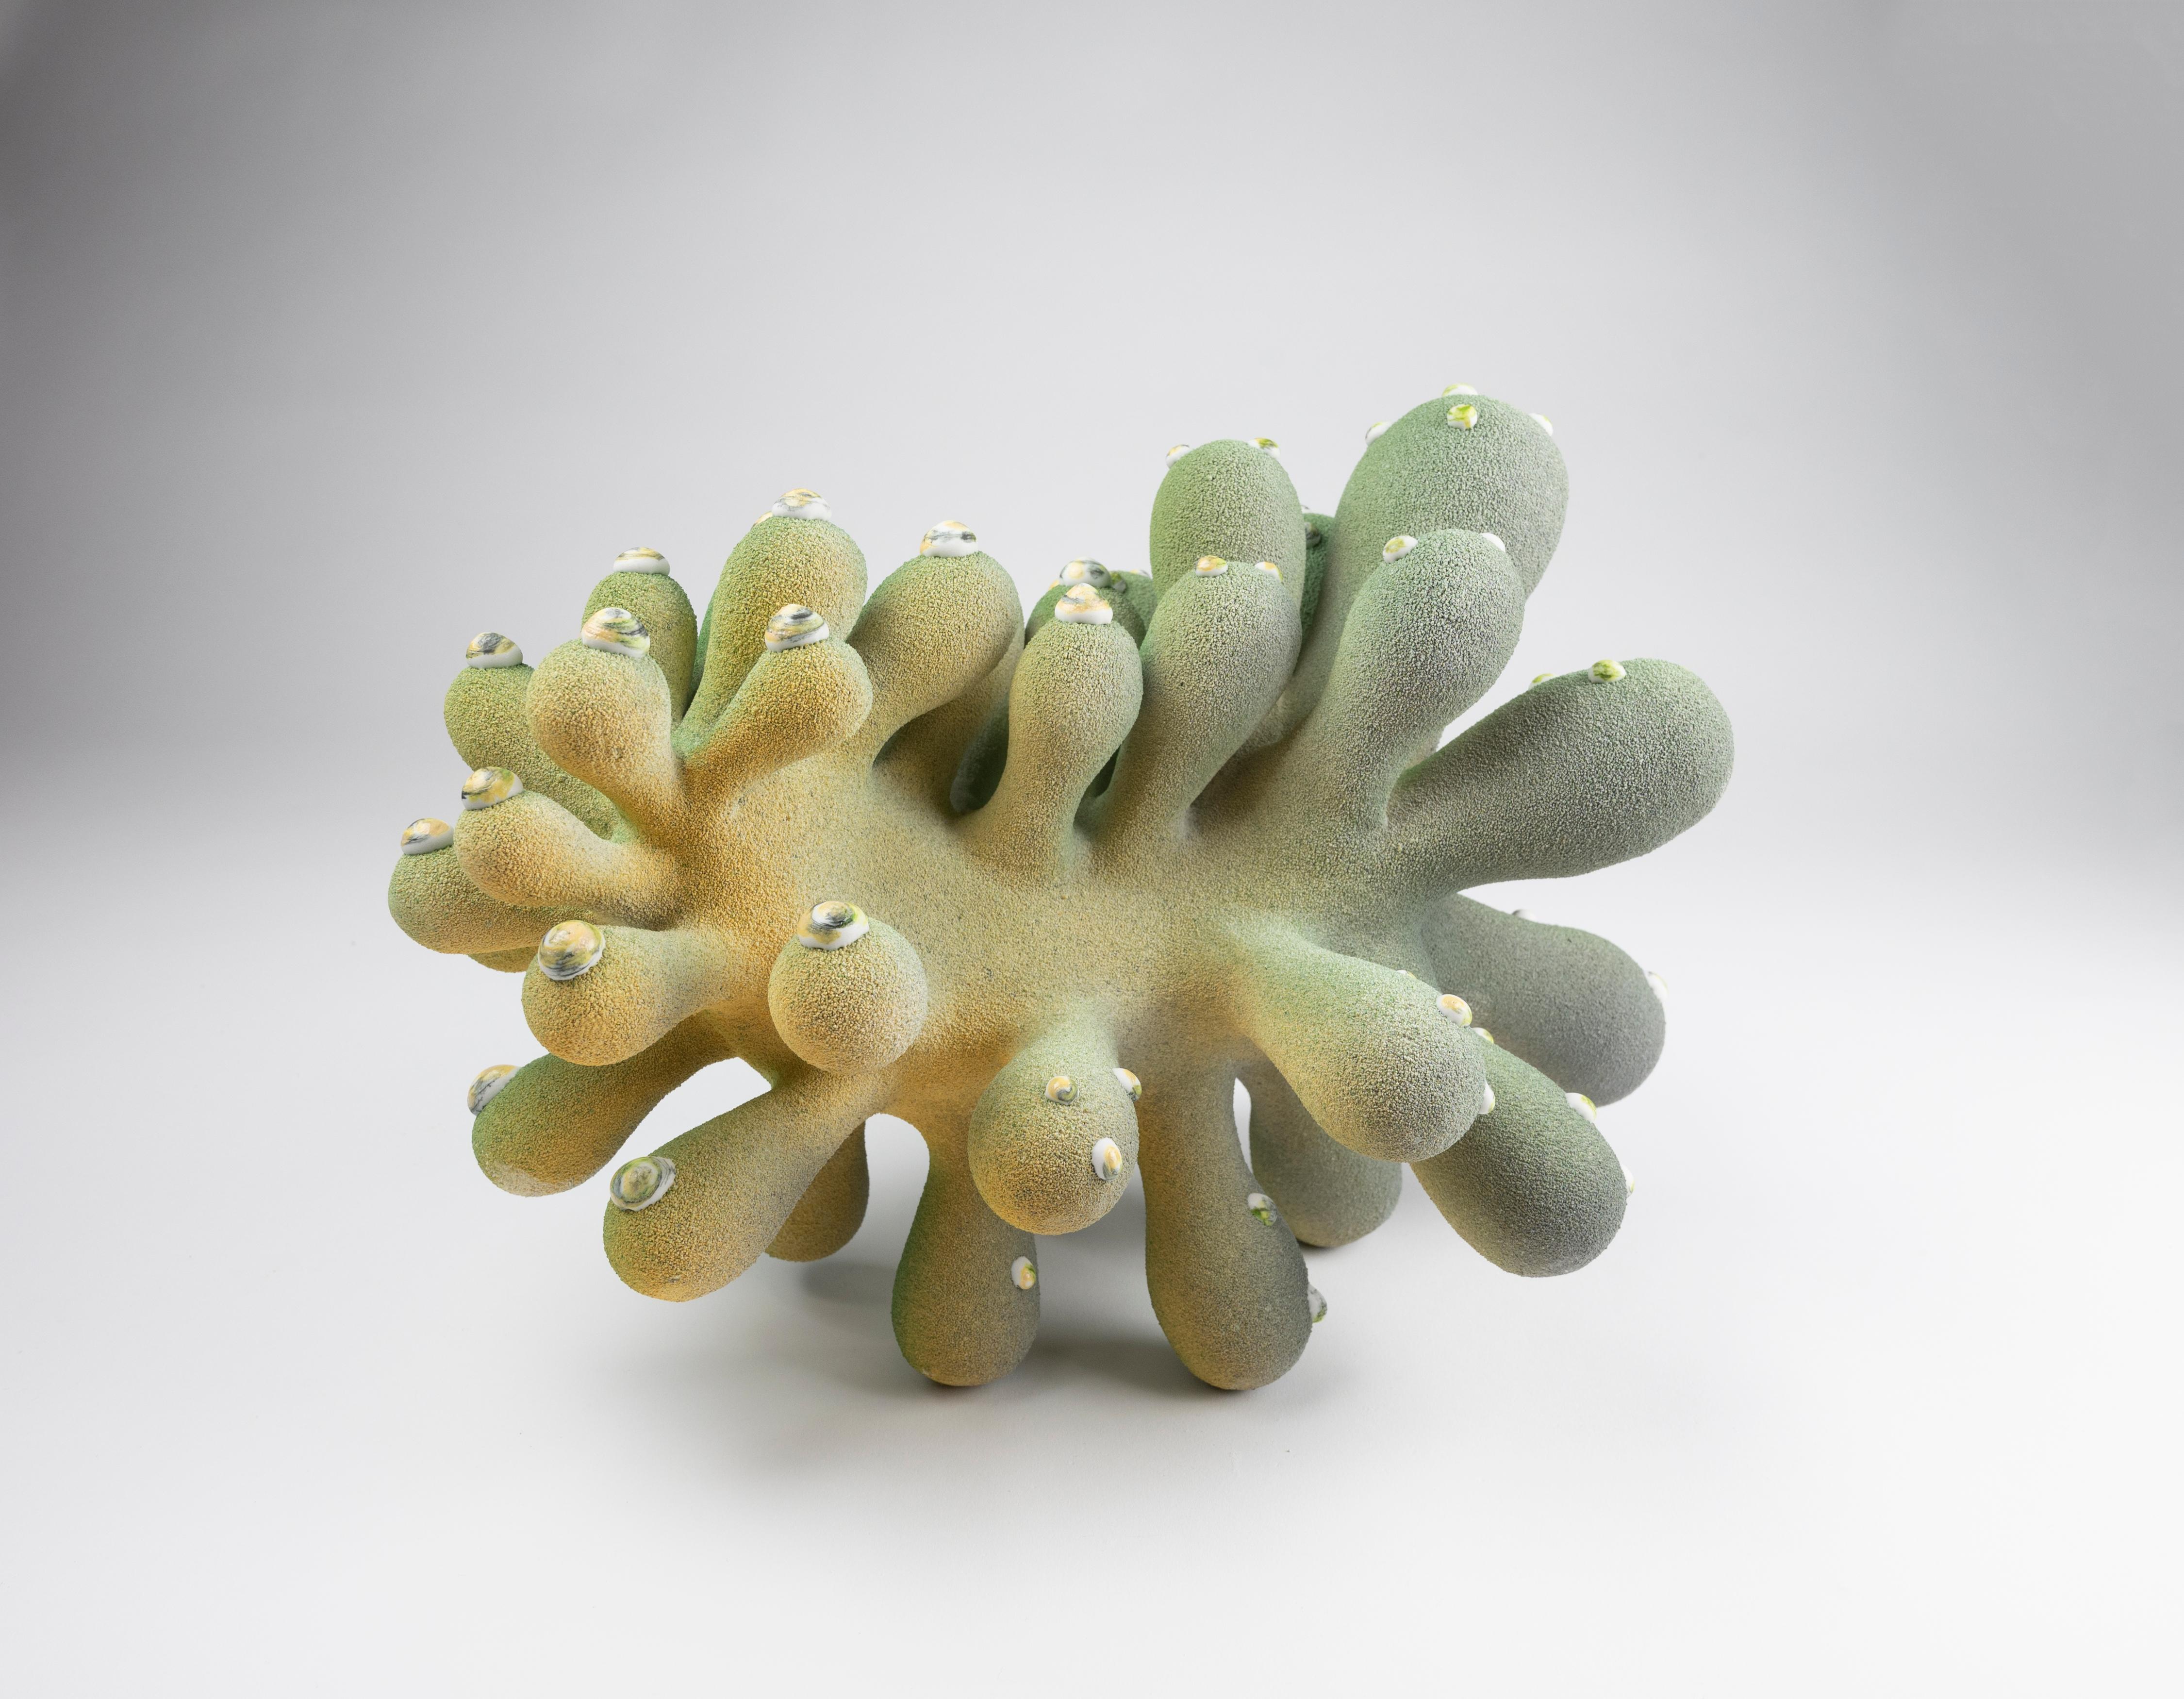 Jewels, 2021 (Ceramic, C. 10 in. h x 15 in. w x 10 in. d, Object No.: 3861)

Toni Losey’s work hums with an underlying current of rhythm and organization.  The repetition found on the wheel influences her work as Losey intuitively builds sculptural